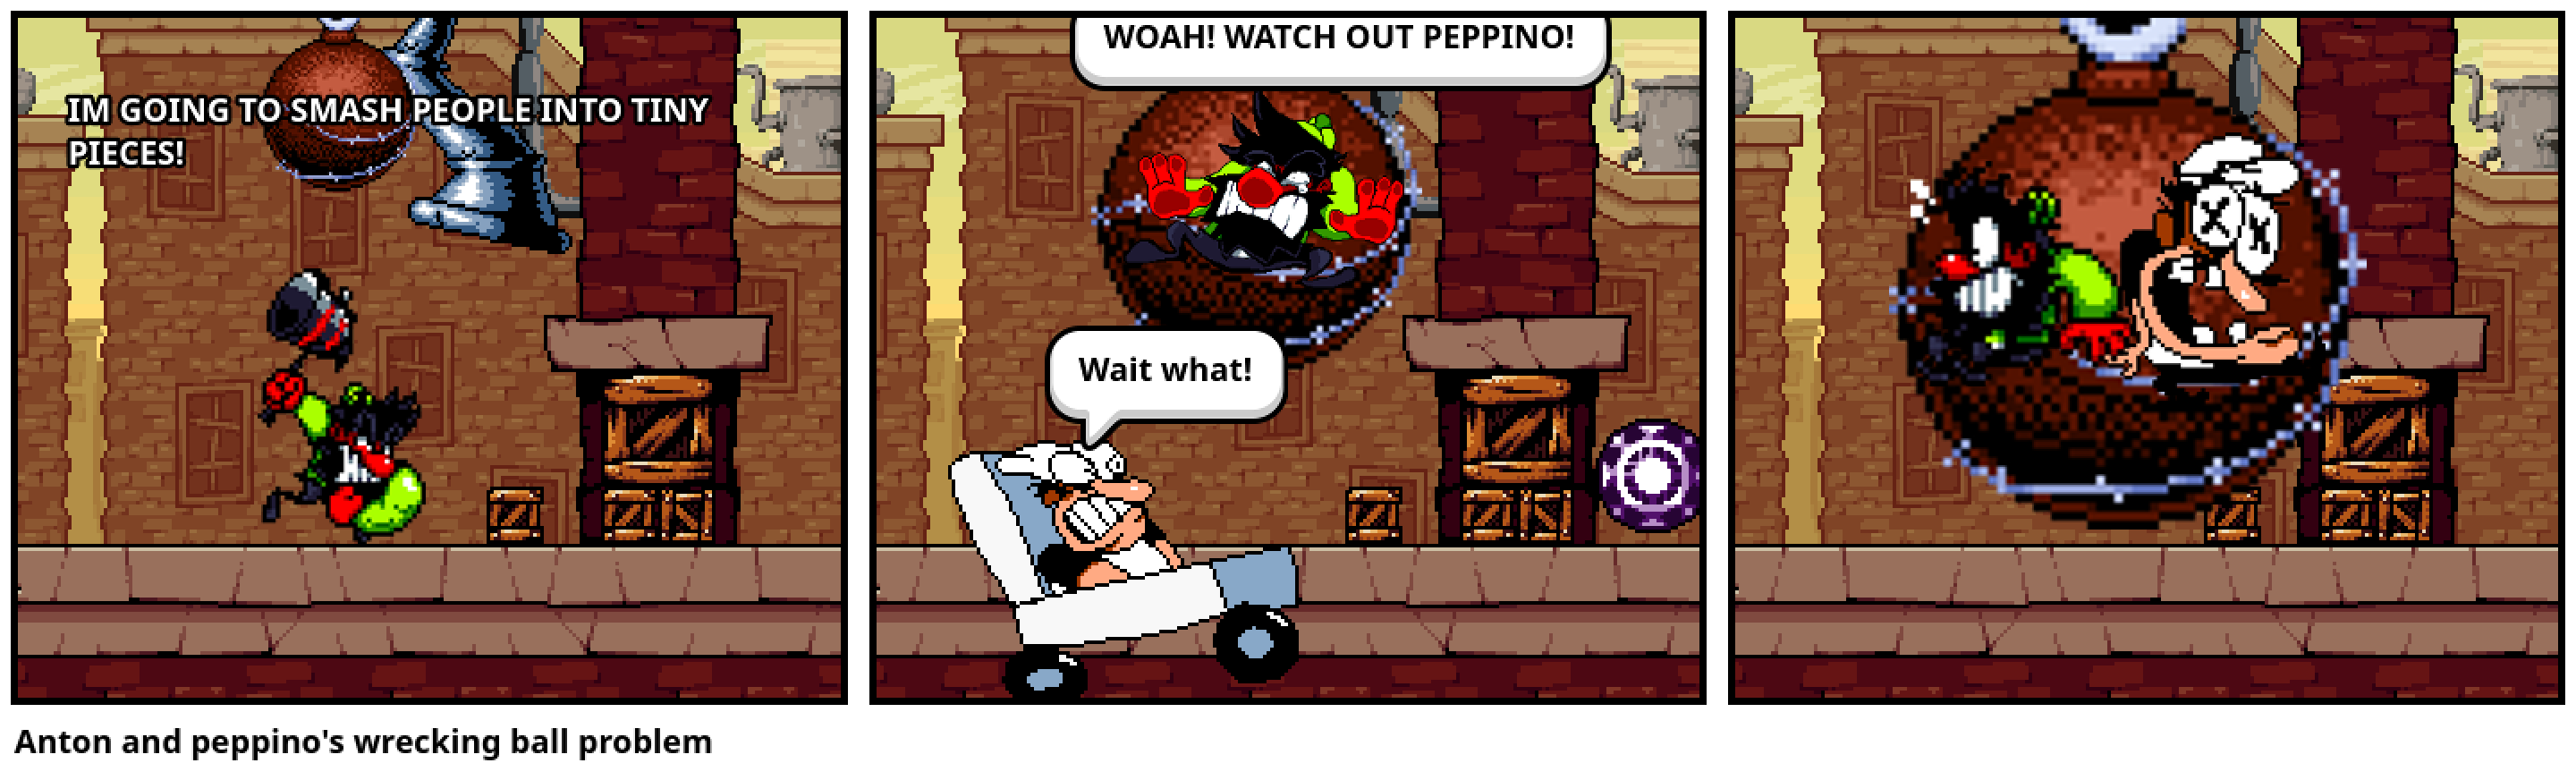 Anton and peppino's wrecking ball problem